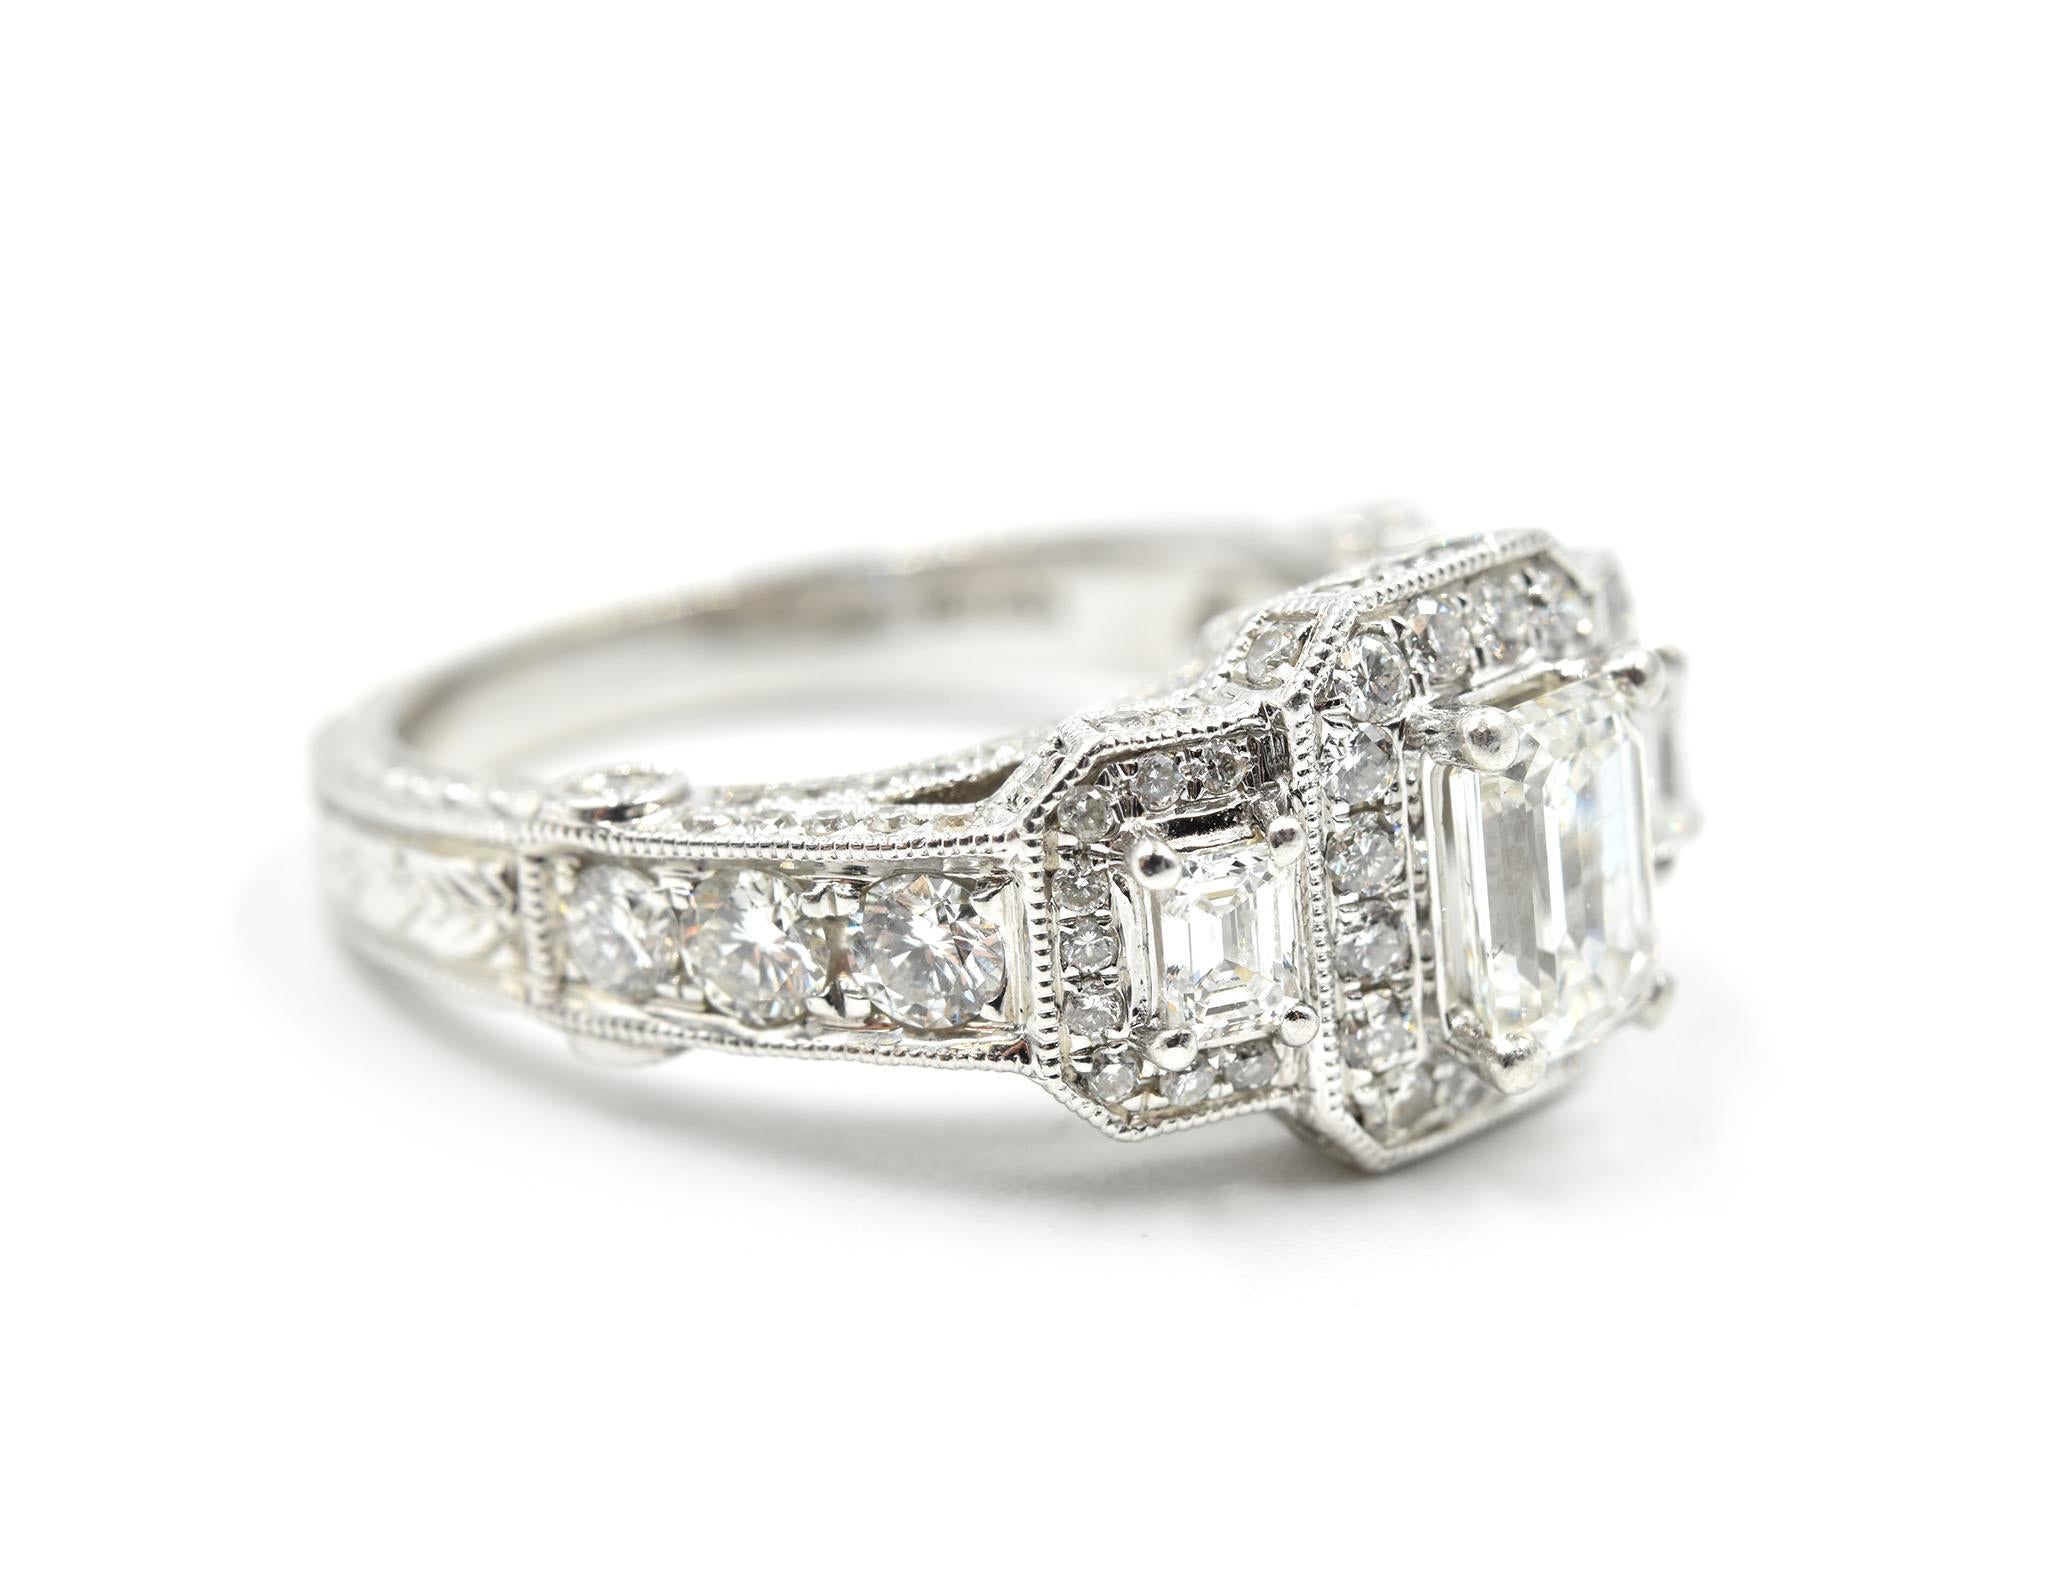 This beautiful engagement ring features a gleaming array of 3 emerald cut diamonds weighing approximately .90cttw and 120 round brilliant cut diamonds weighing approximately 1.45cttw. The diamonds are graded H in color and I1 in clarity. The